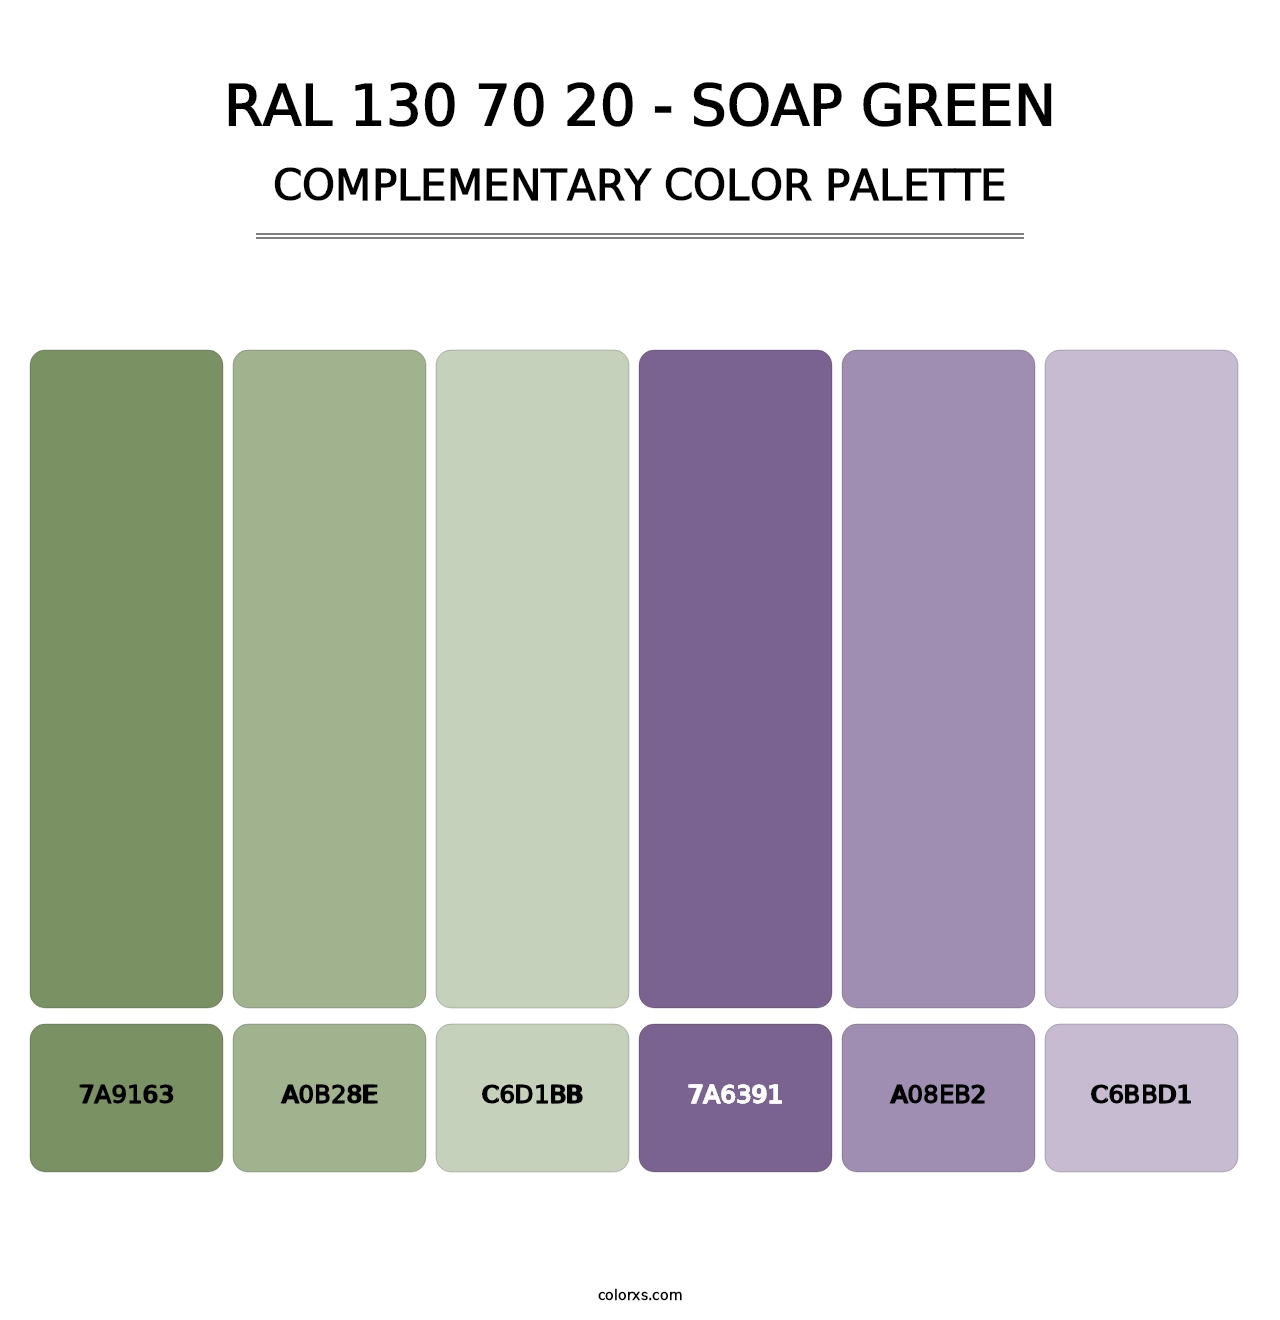 RAL 130 70 20 - Soap Green - Complementary Color Palette